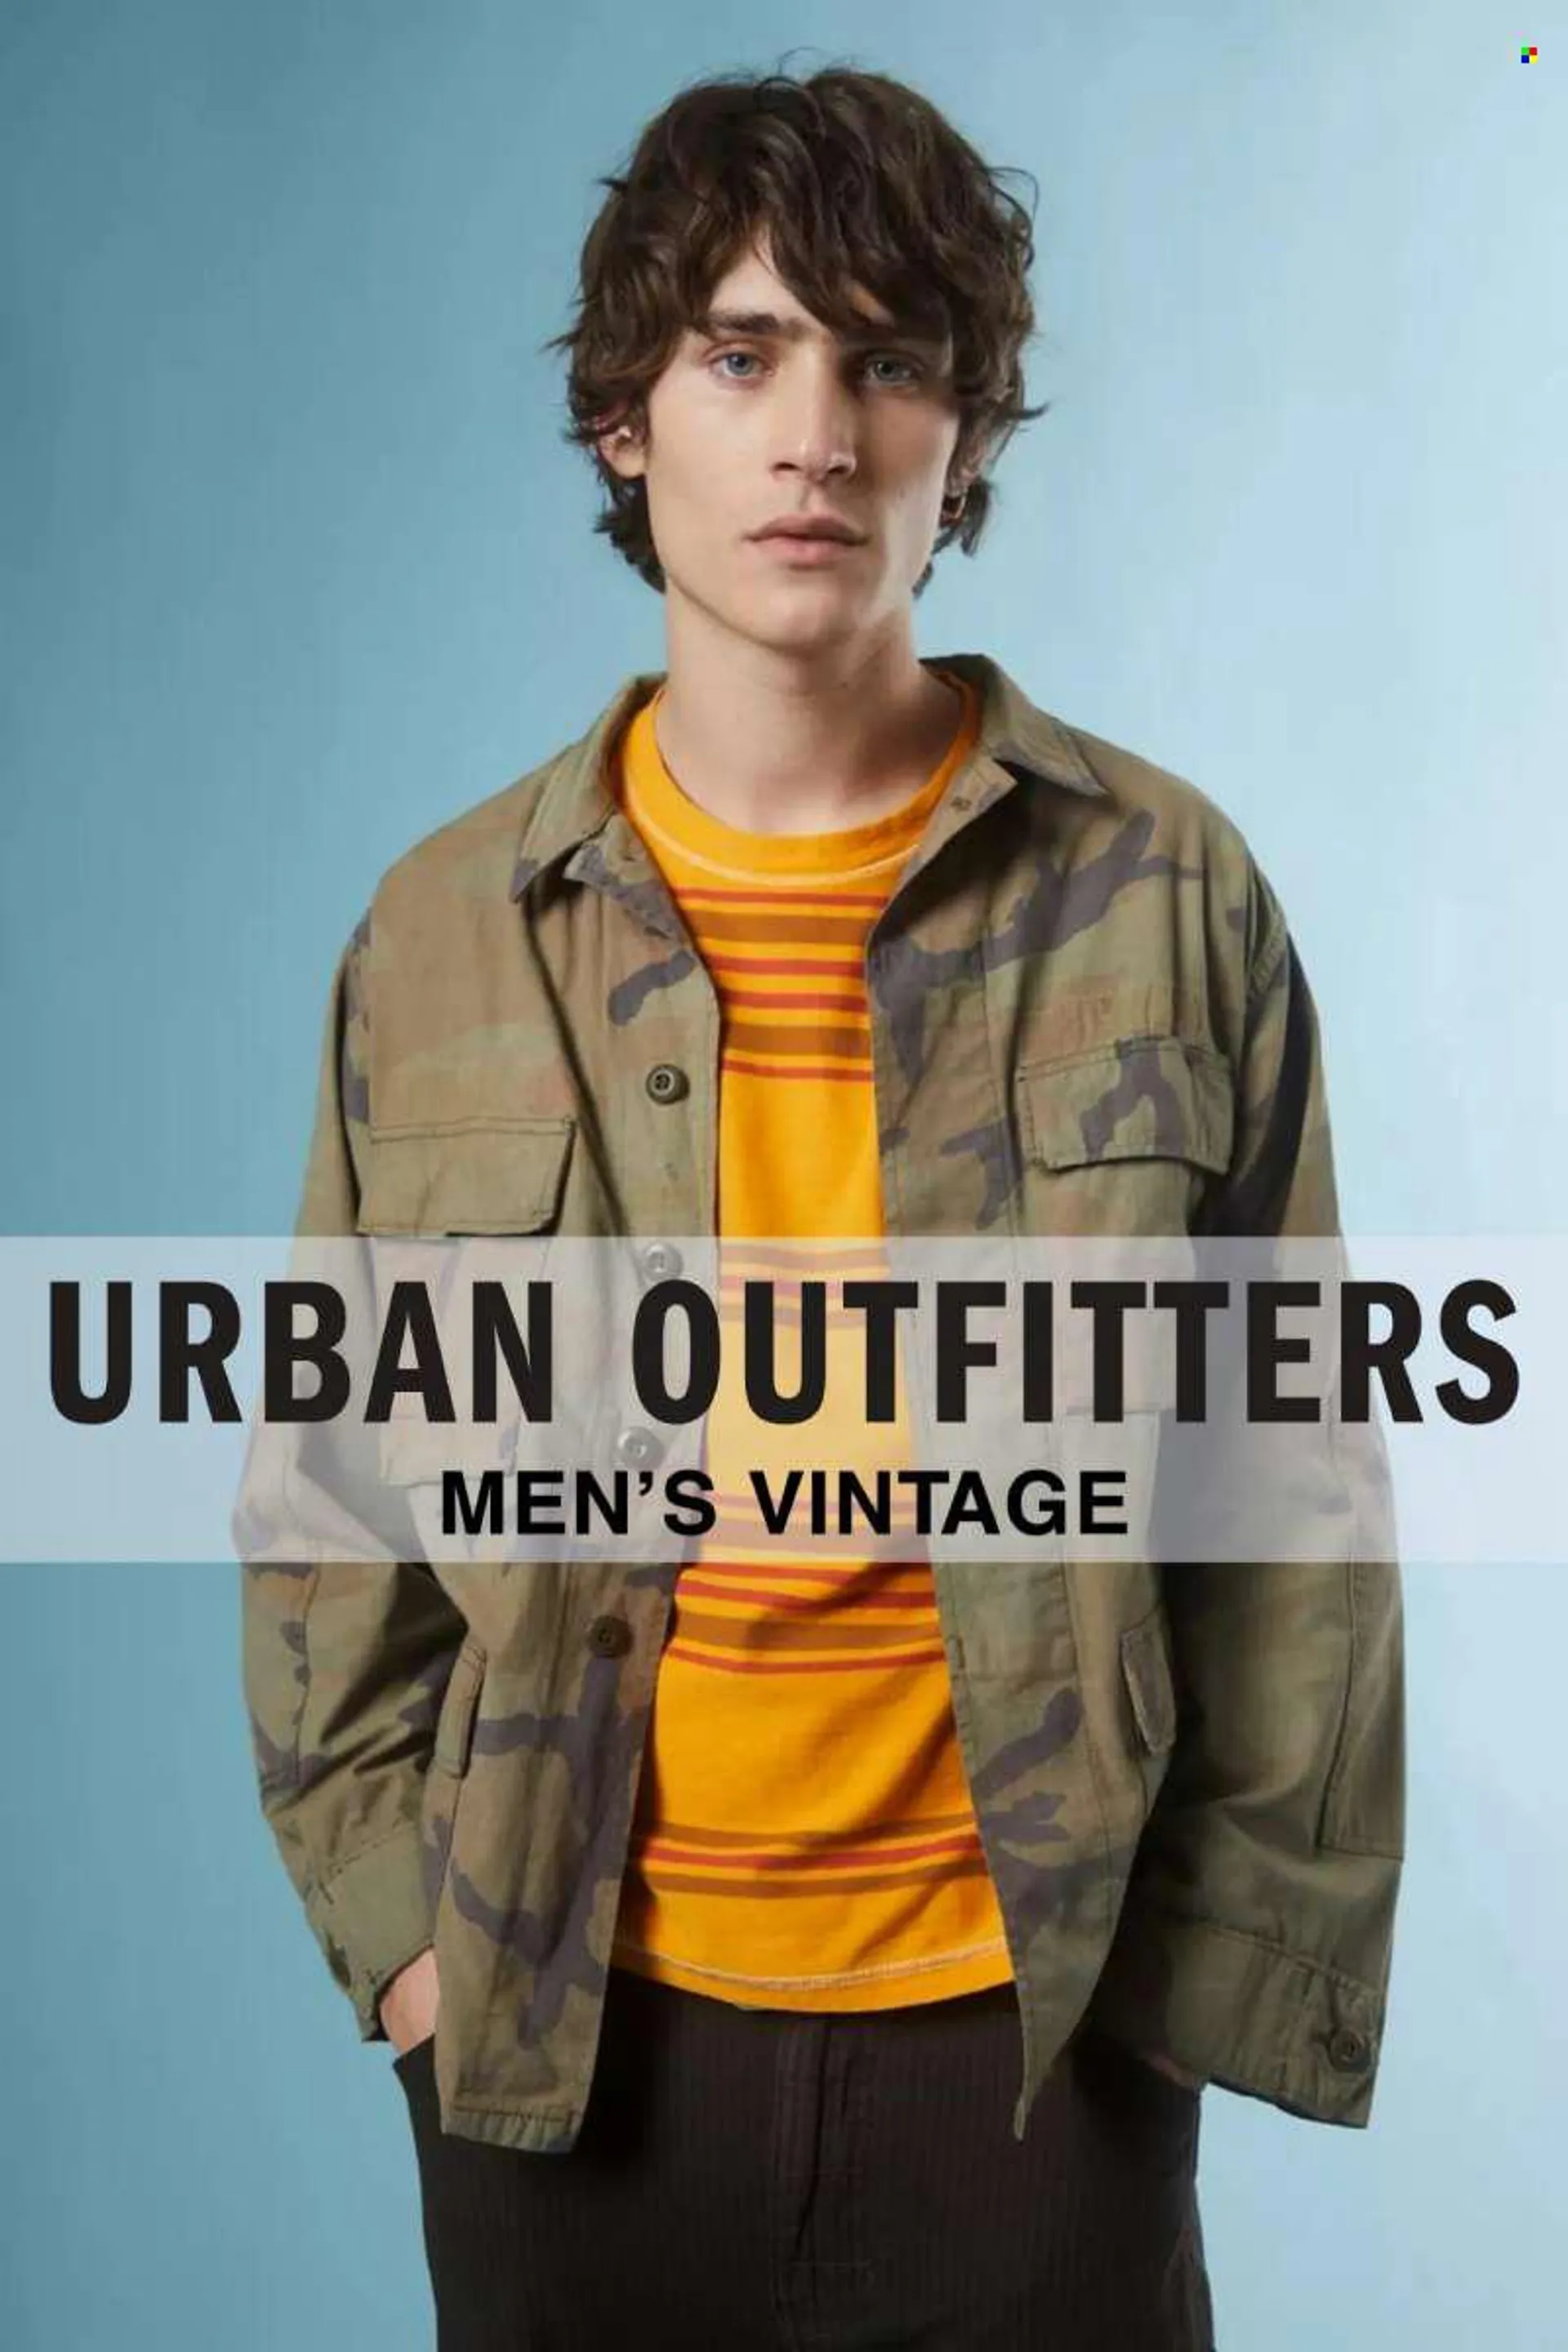 Urban Outfitters tilbud . Side 1.